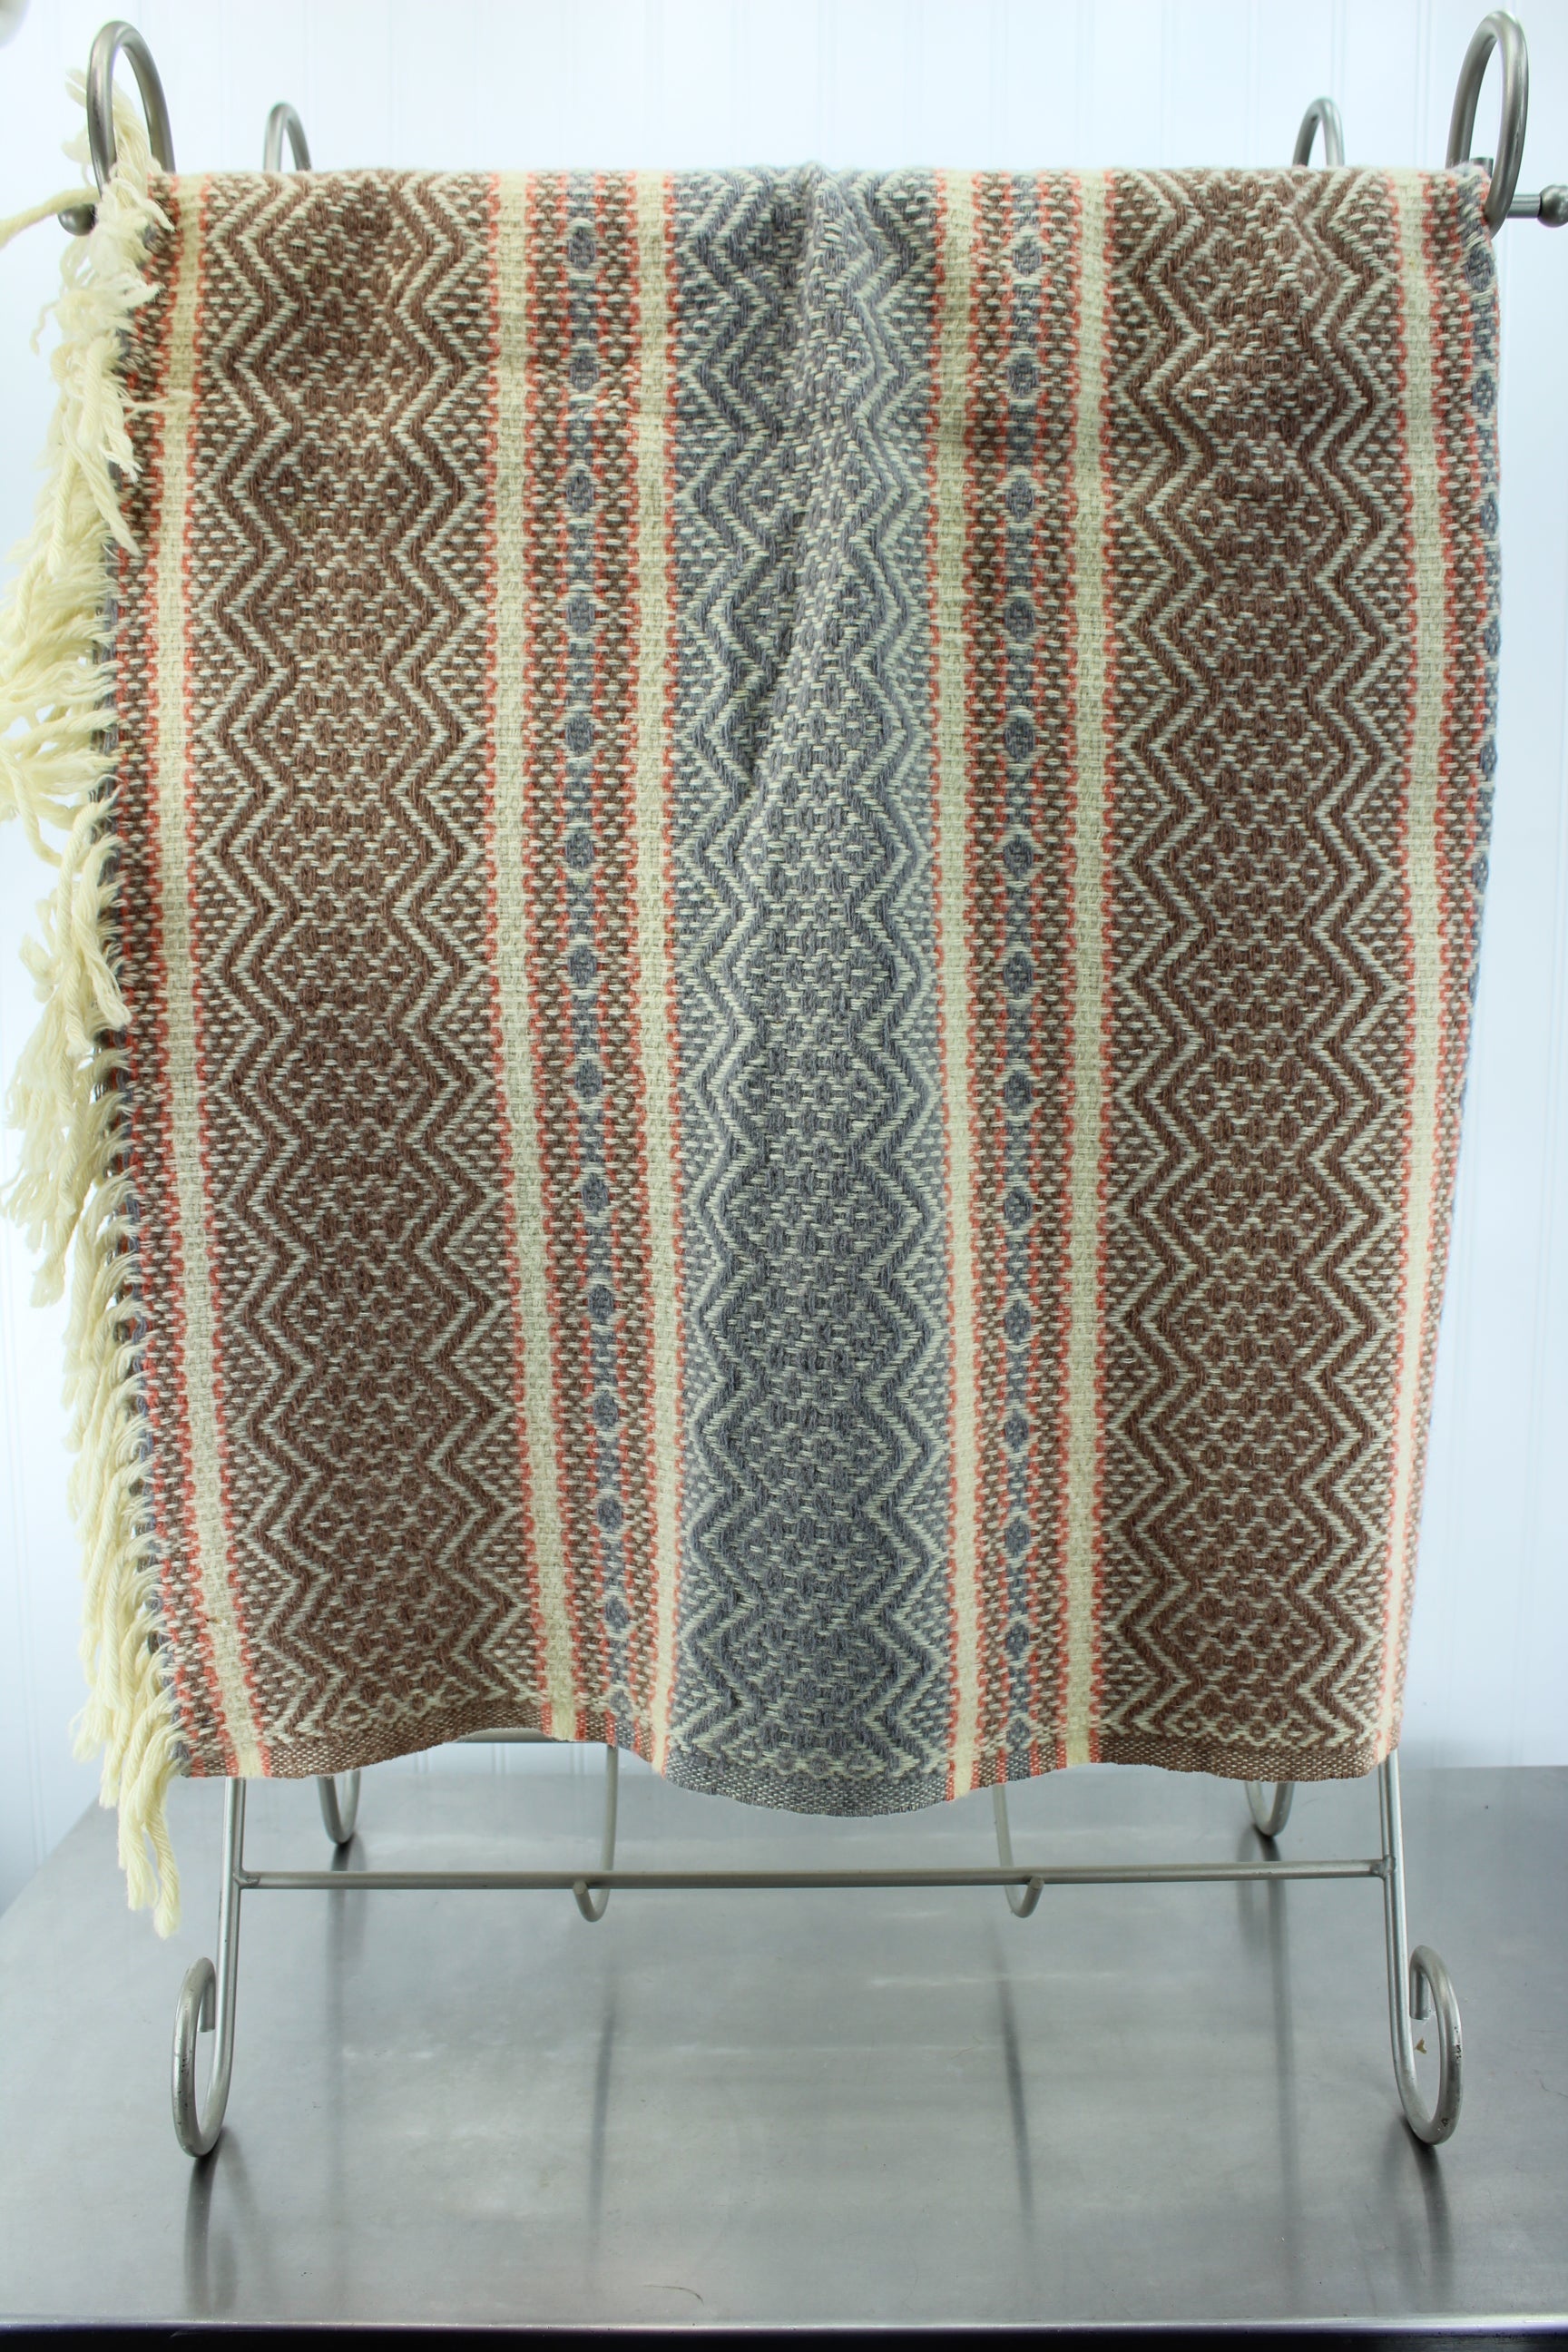 Faribault MN USA Wool Throw - Southwest Linear Design Ivory Coral Blue - 44" X 43" favorite